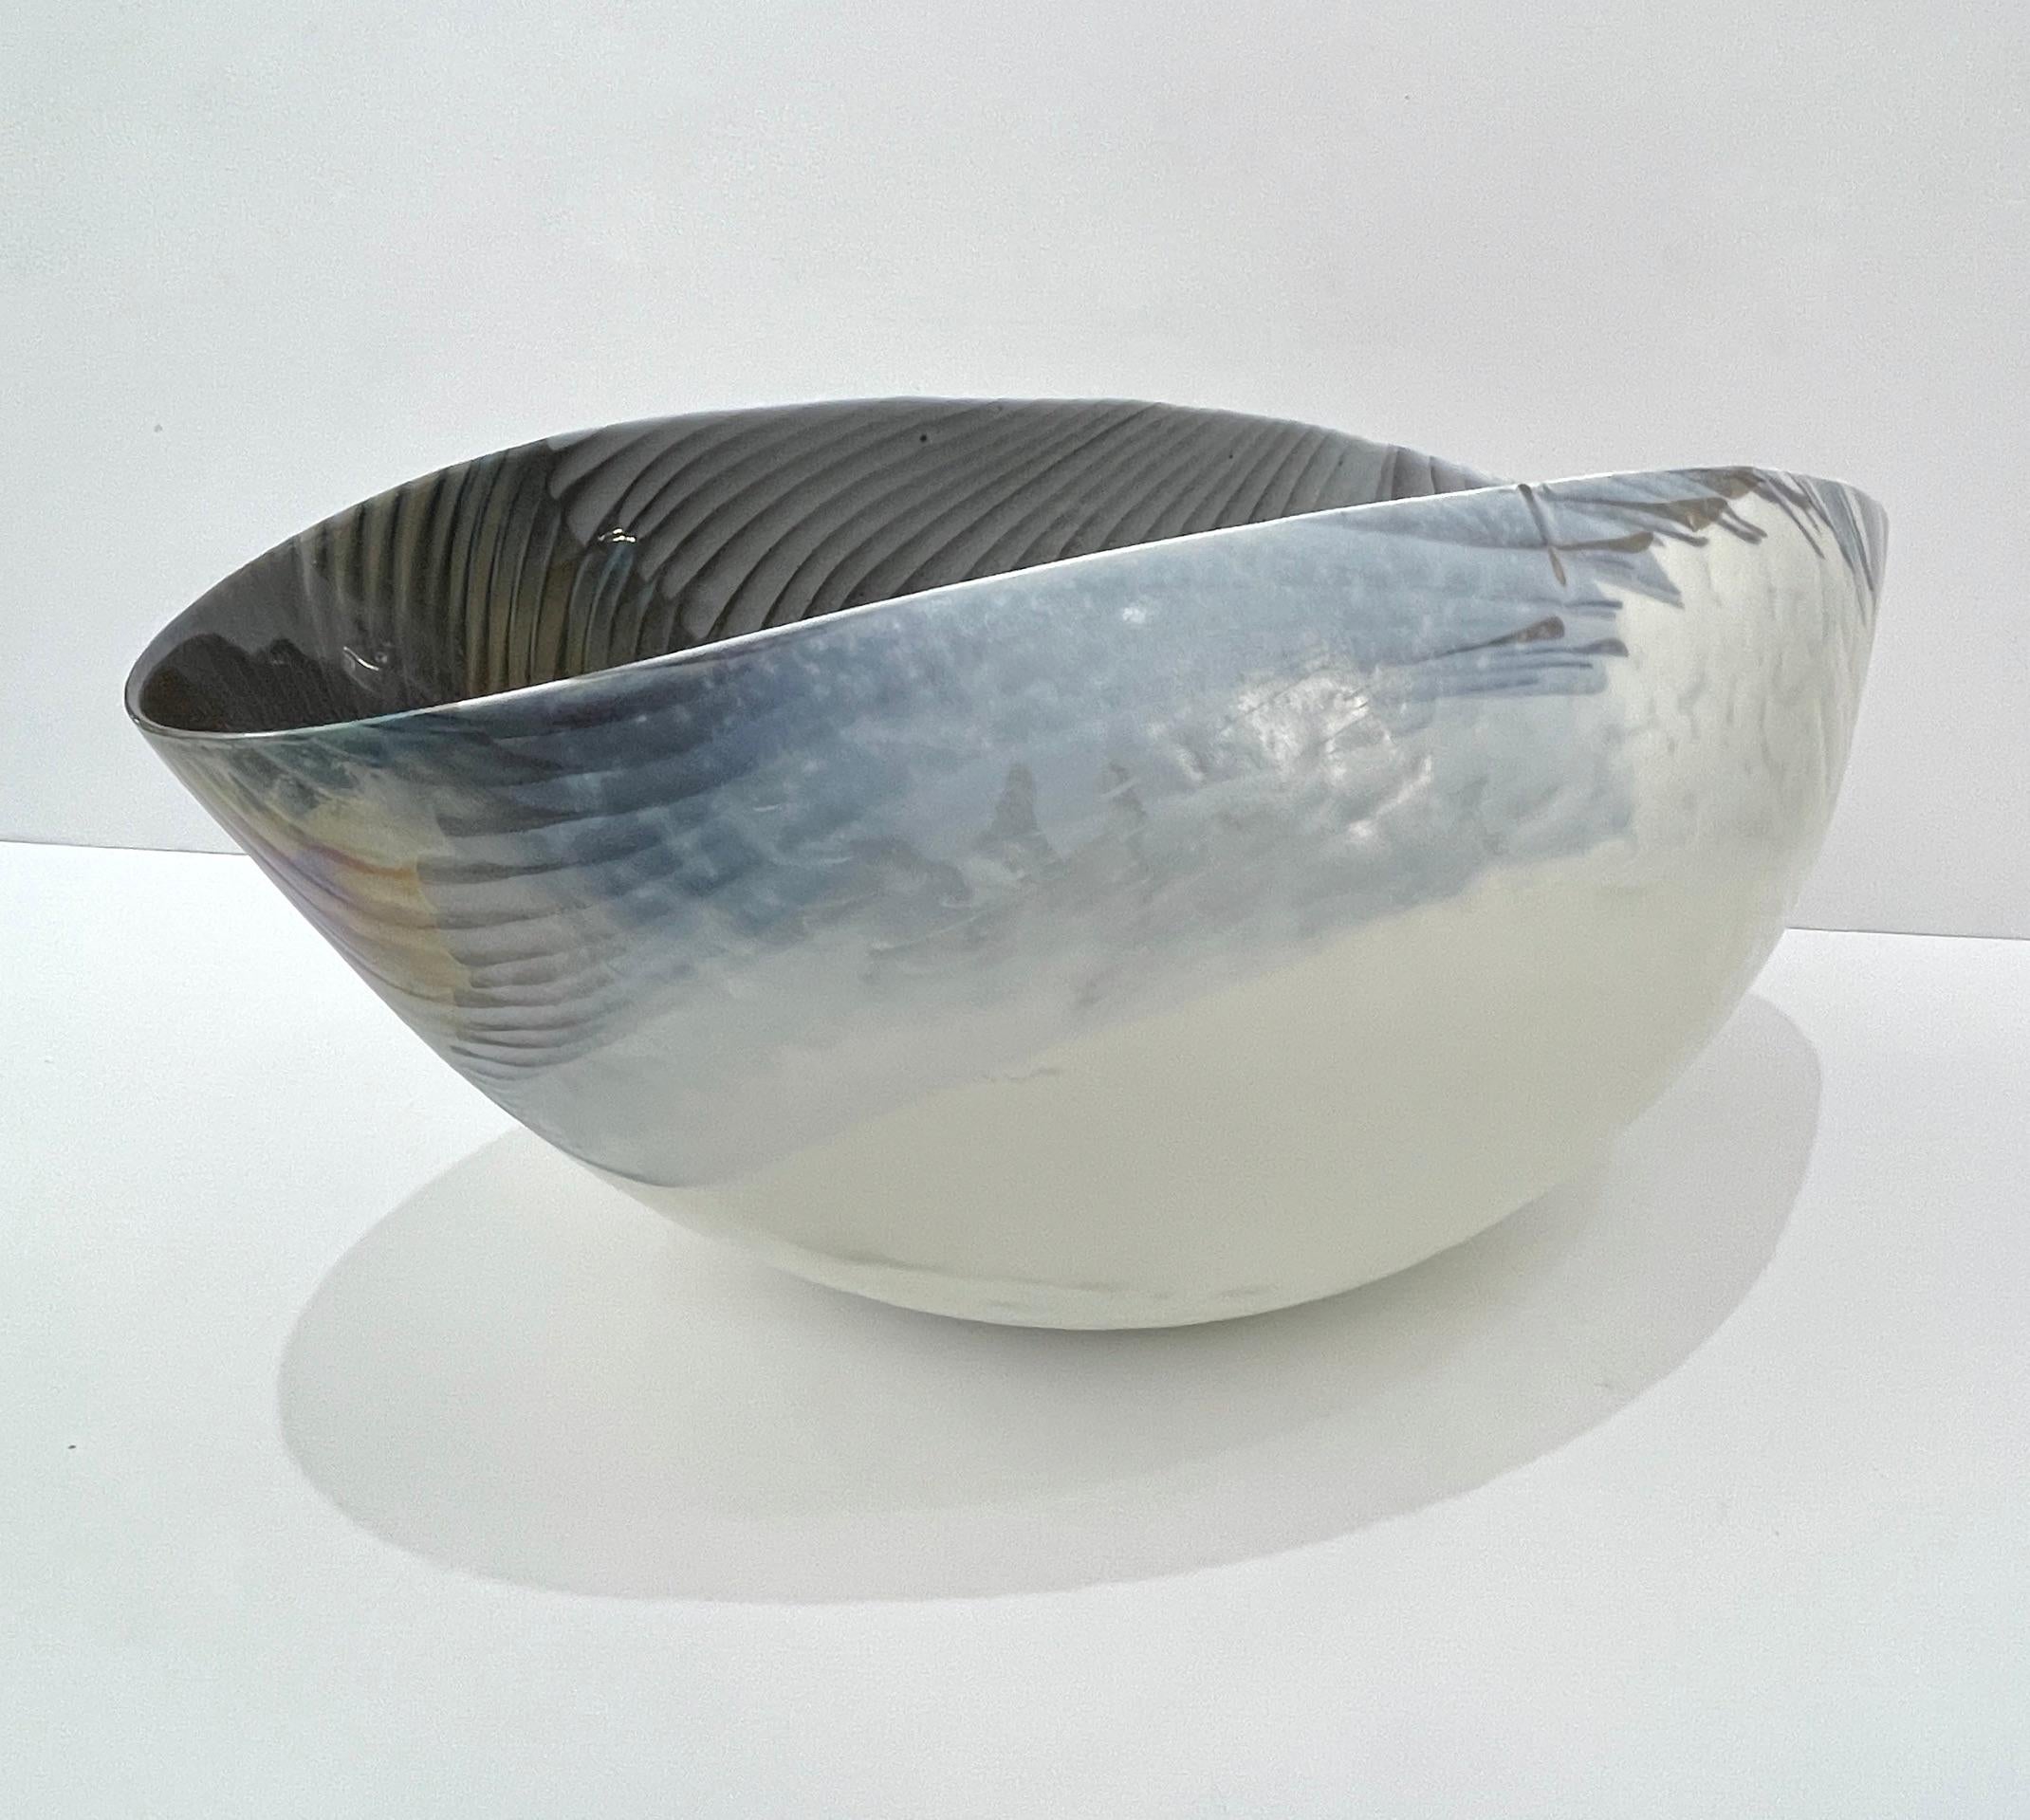 Exclusive very elegant Italian bowl, huge Venetian blown Murano glass modern centerpiece, with an unusual organic shape and a waved rim. The iridescent azure blue and ivory white Murano glass is decorated with a sophisticated blown bird feather